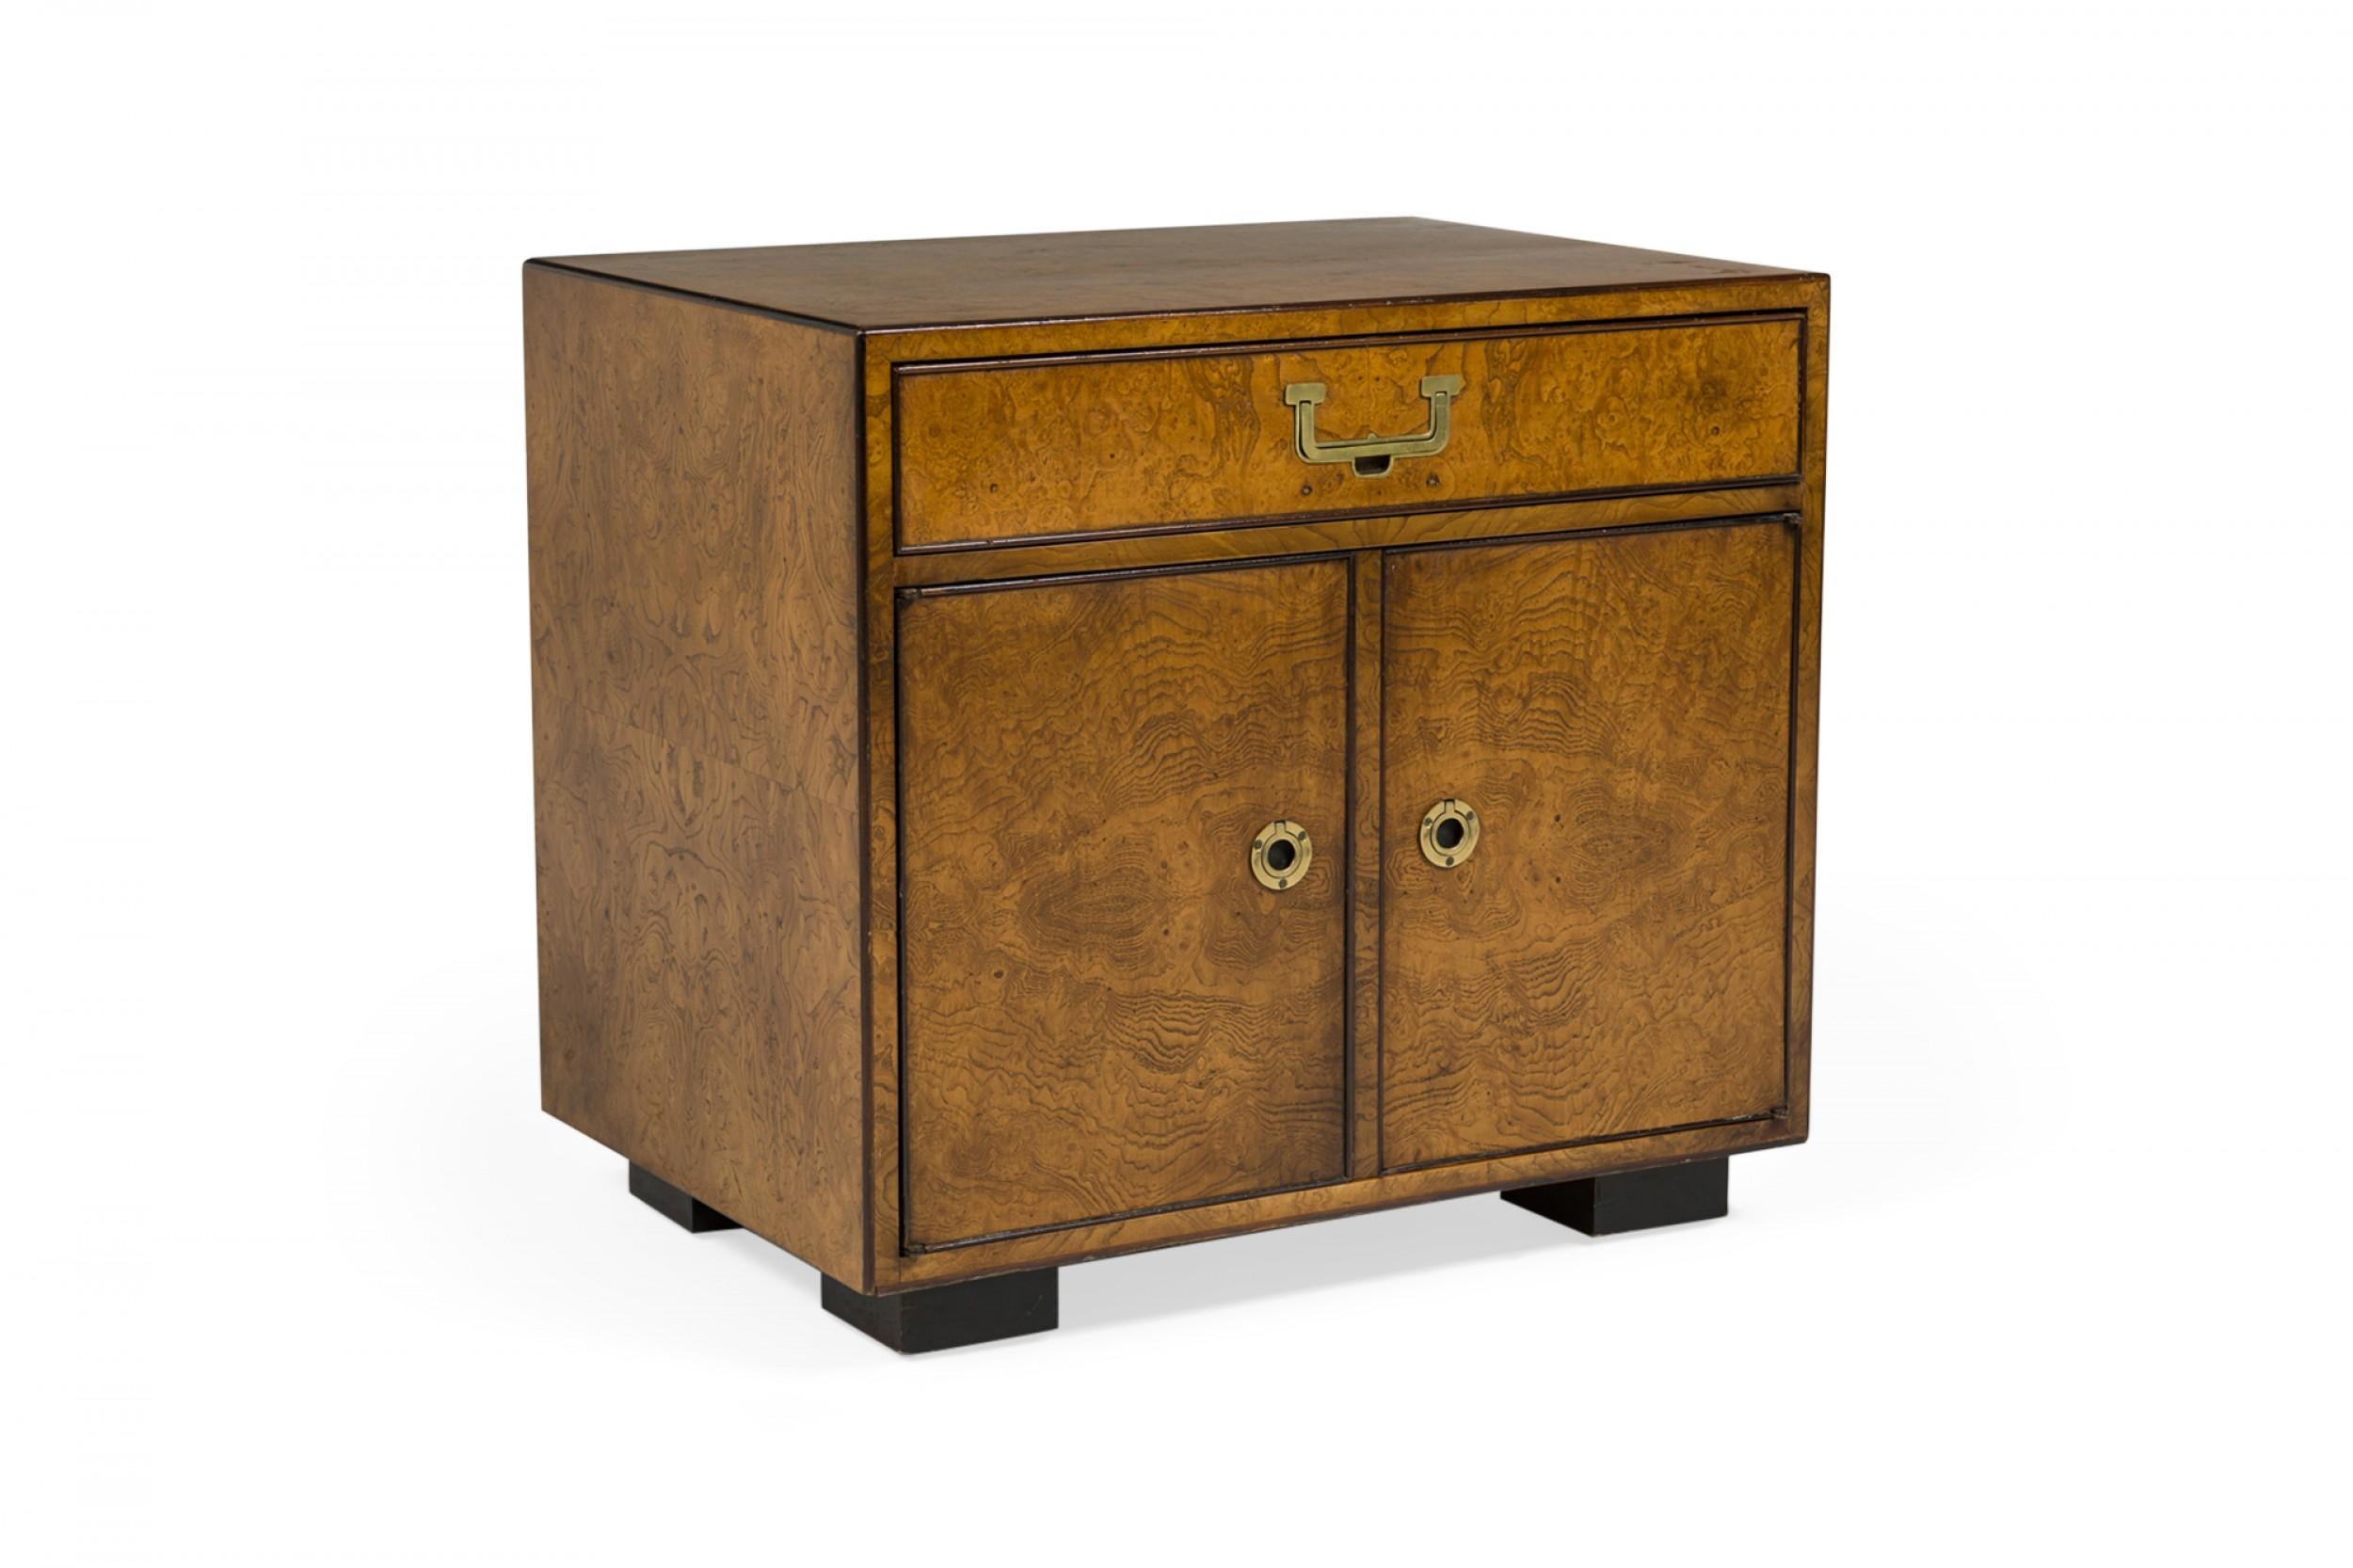 Pair of American mid-century nightstands / commodes with a burl wood veneer, single drawer with brass pulls, and two cabinet doors with brass pulls below. (JOHN WIDDICOMB)(PRICED AS PAIR)
 